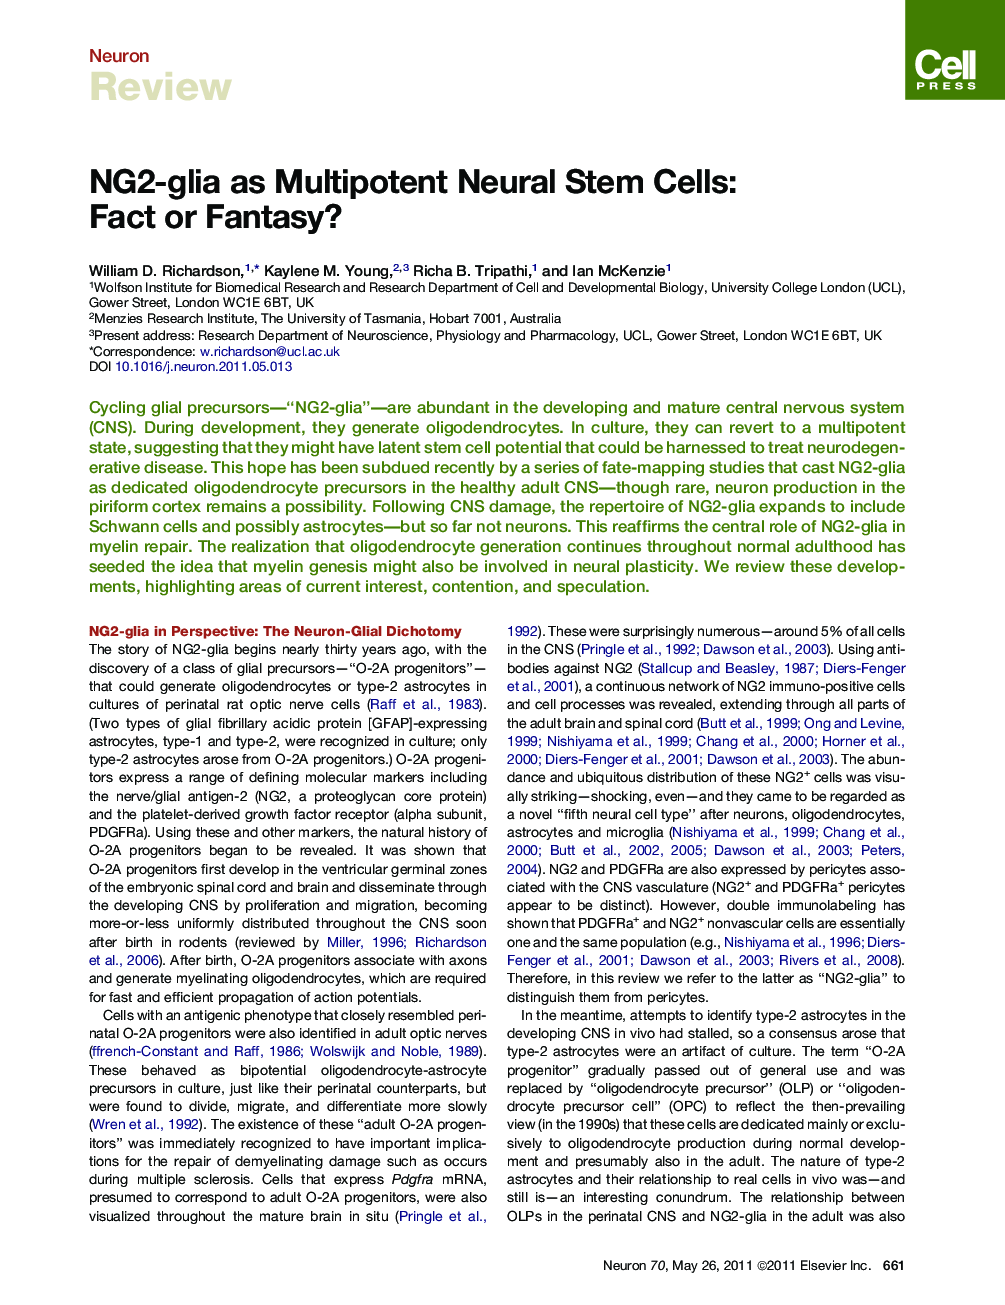 NG2-glia as Multipotent Neural Stem Cells: Fact or Fantasy?